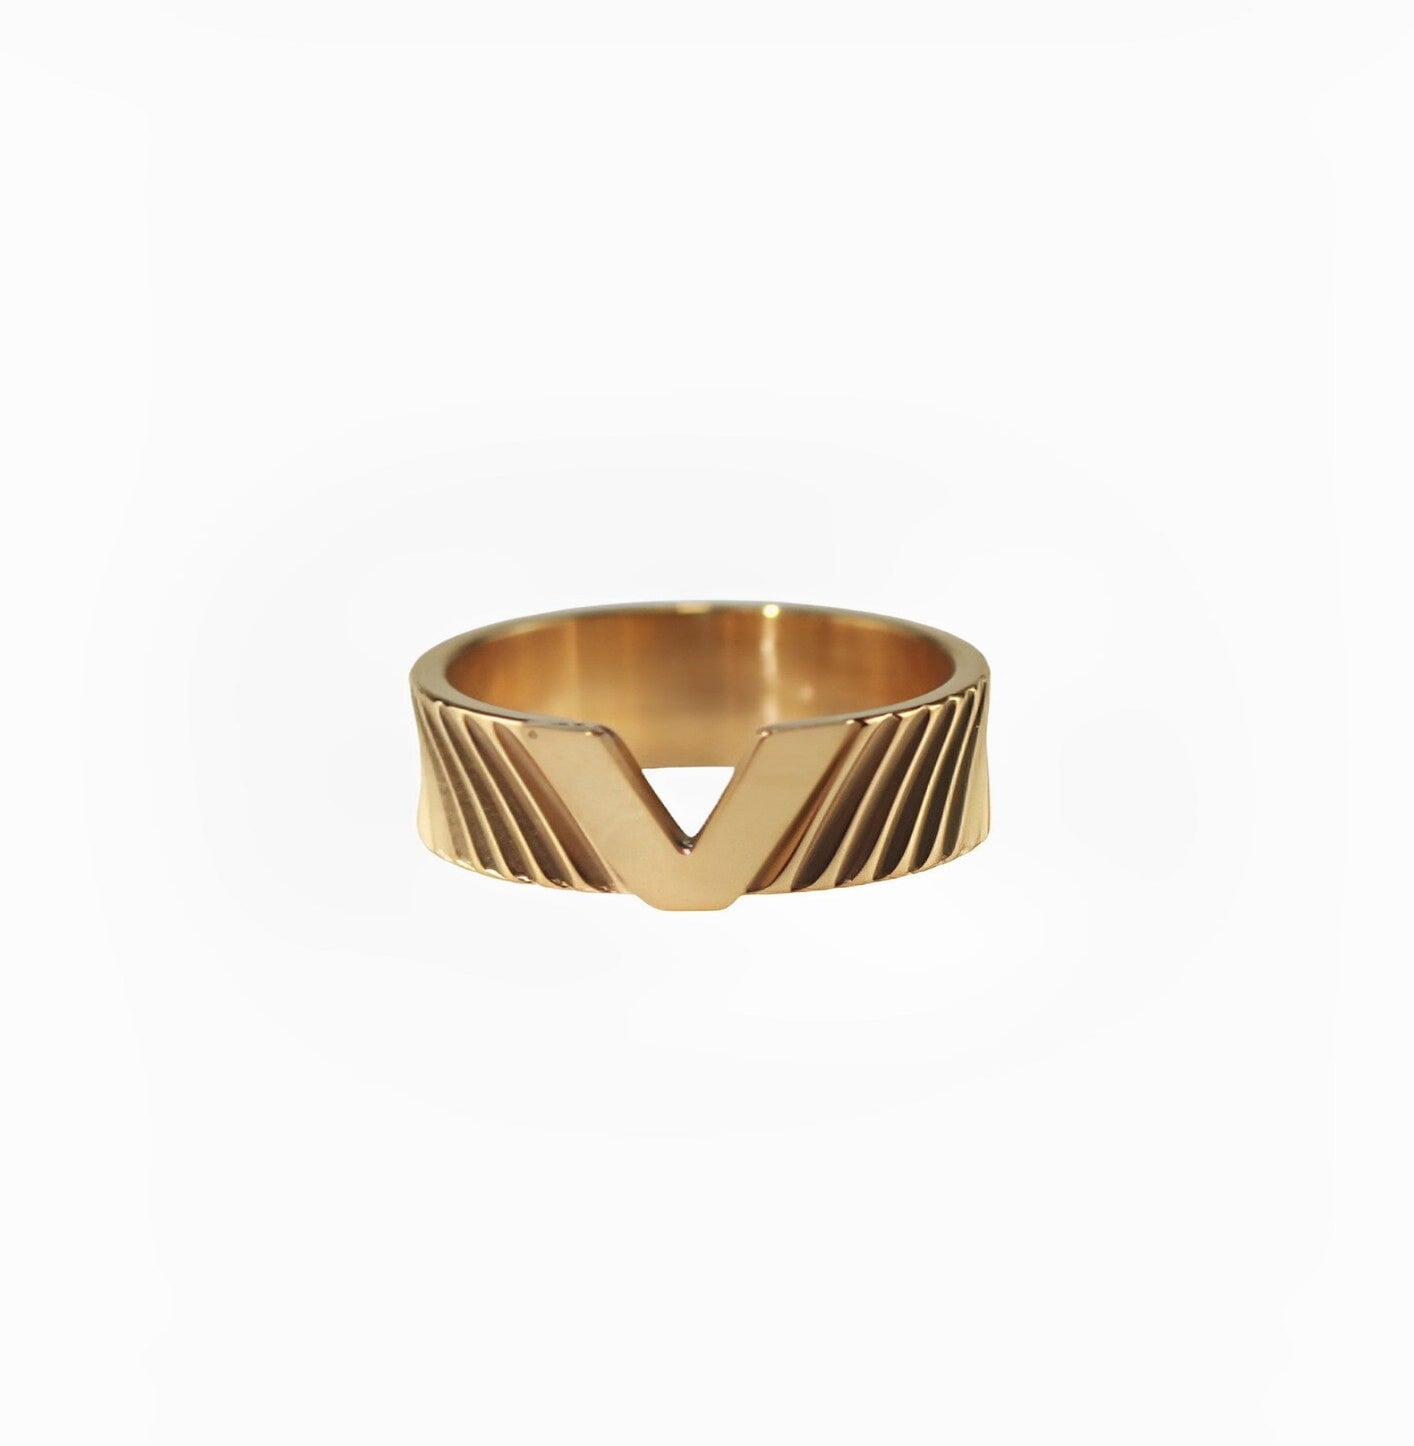 PATTERN V RING ring Yubama Jewelry Online Store - The Elegant Designs of Gold and Silver ! 